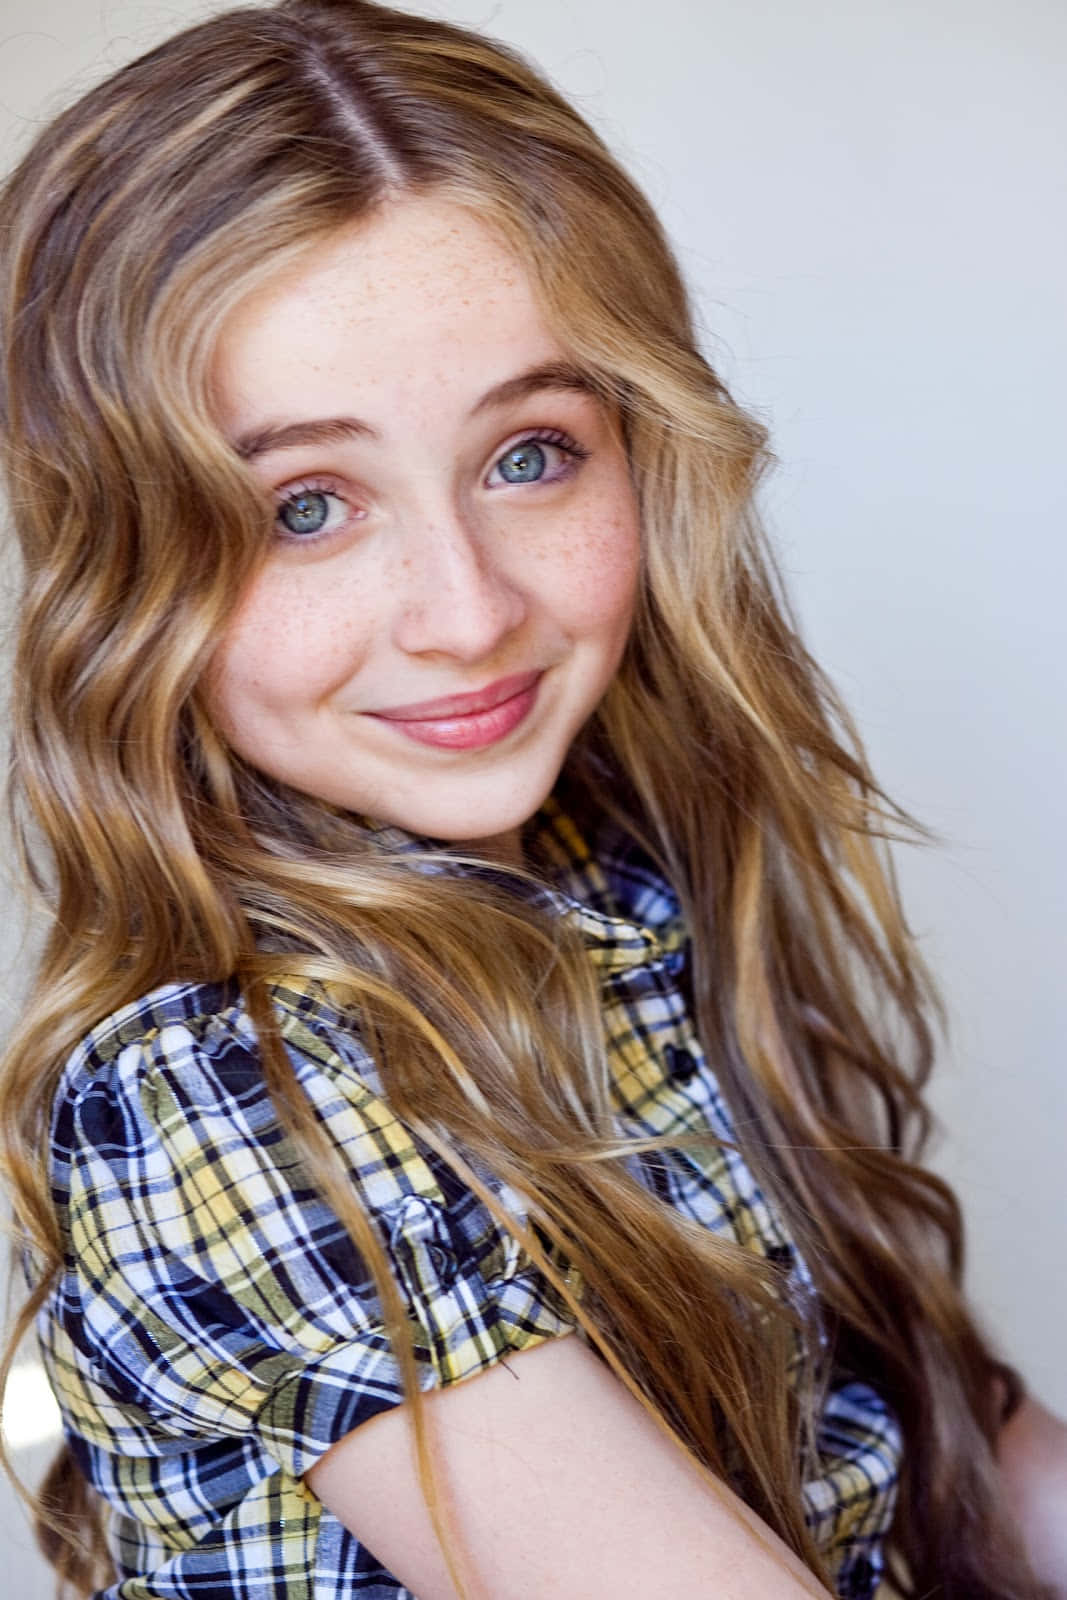 Smiling Young Girlwith Blue Eyes